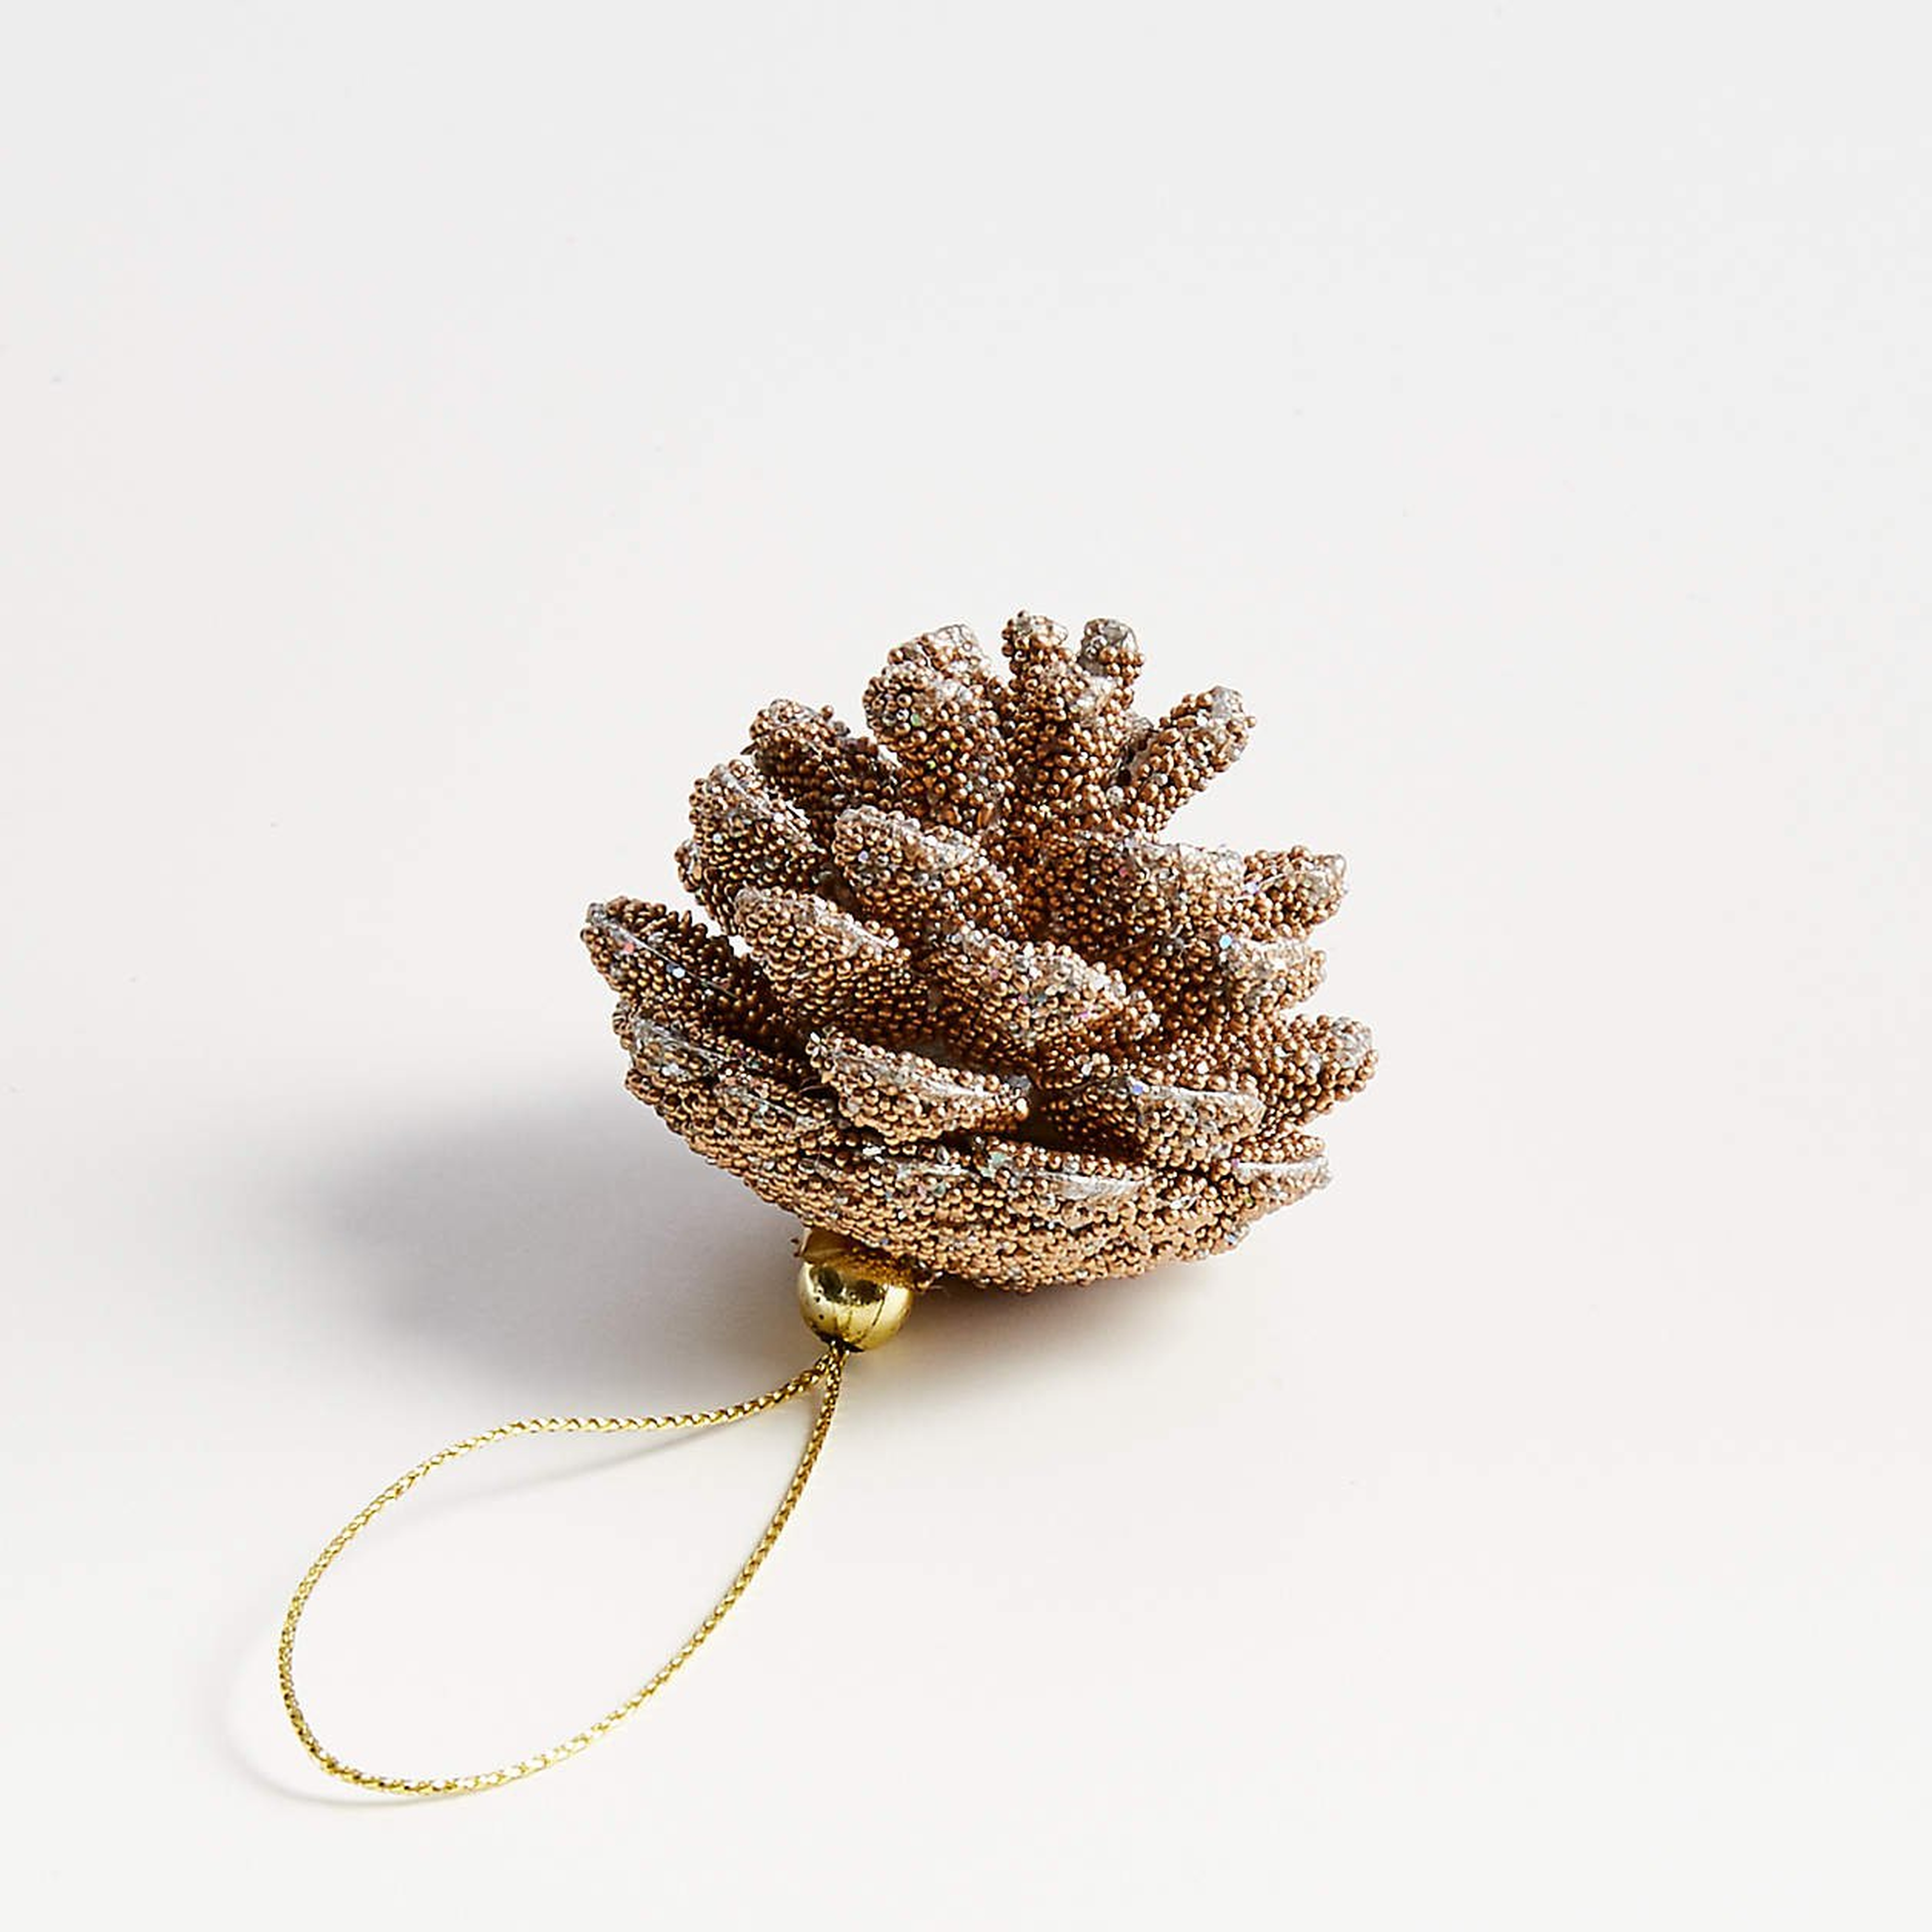 Gold-Beaded Glitter Pinecone Christmas Tree Ornament - Crate and Barrel